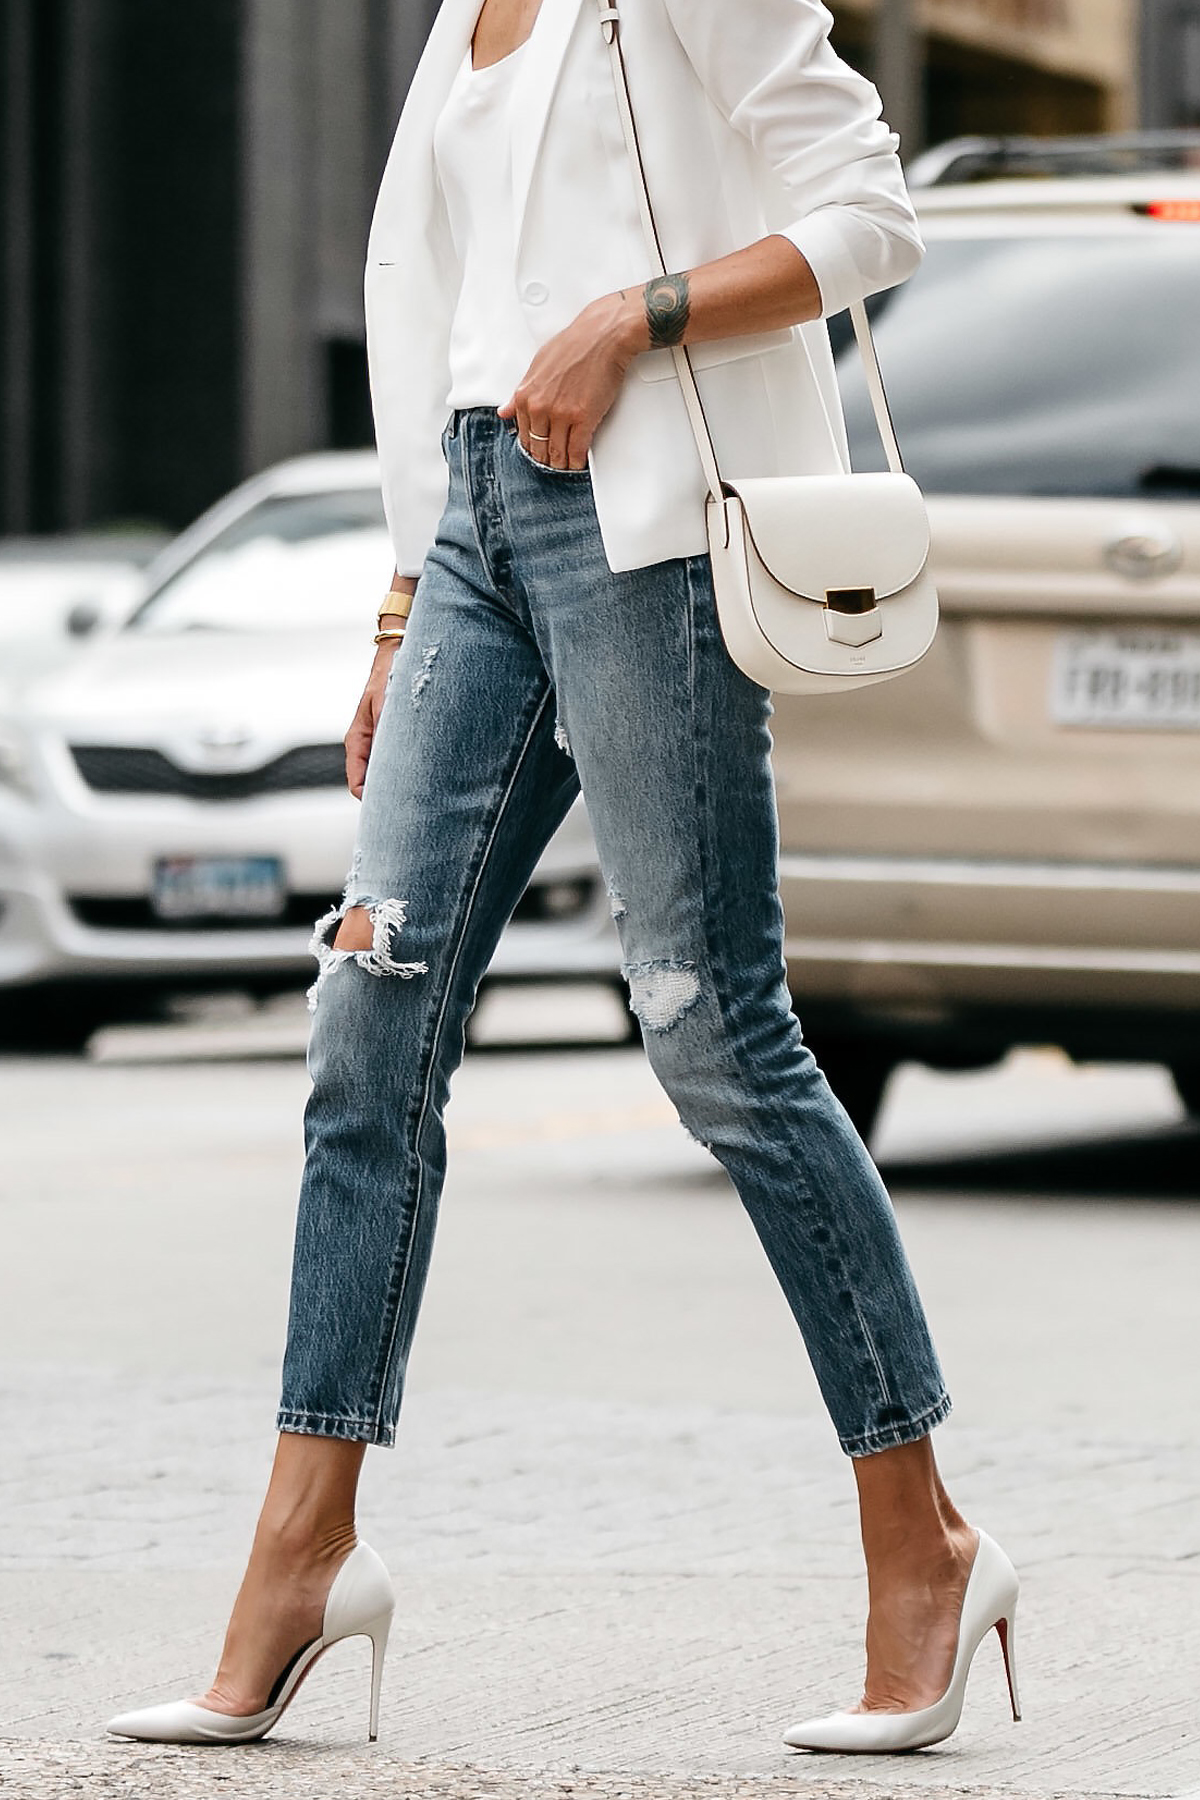 White Blazer Distressed Jeans Outfit